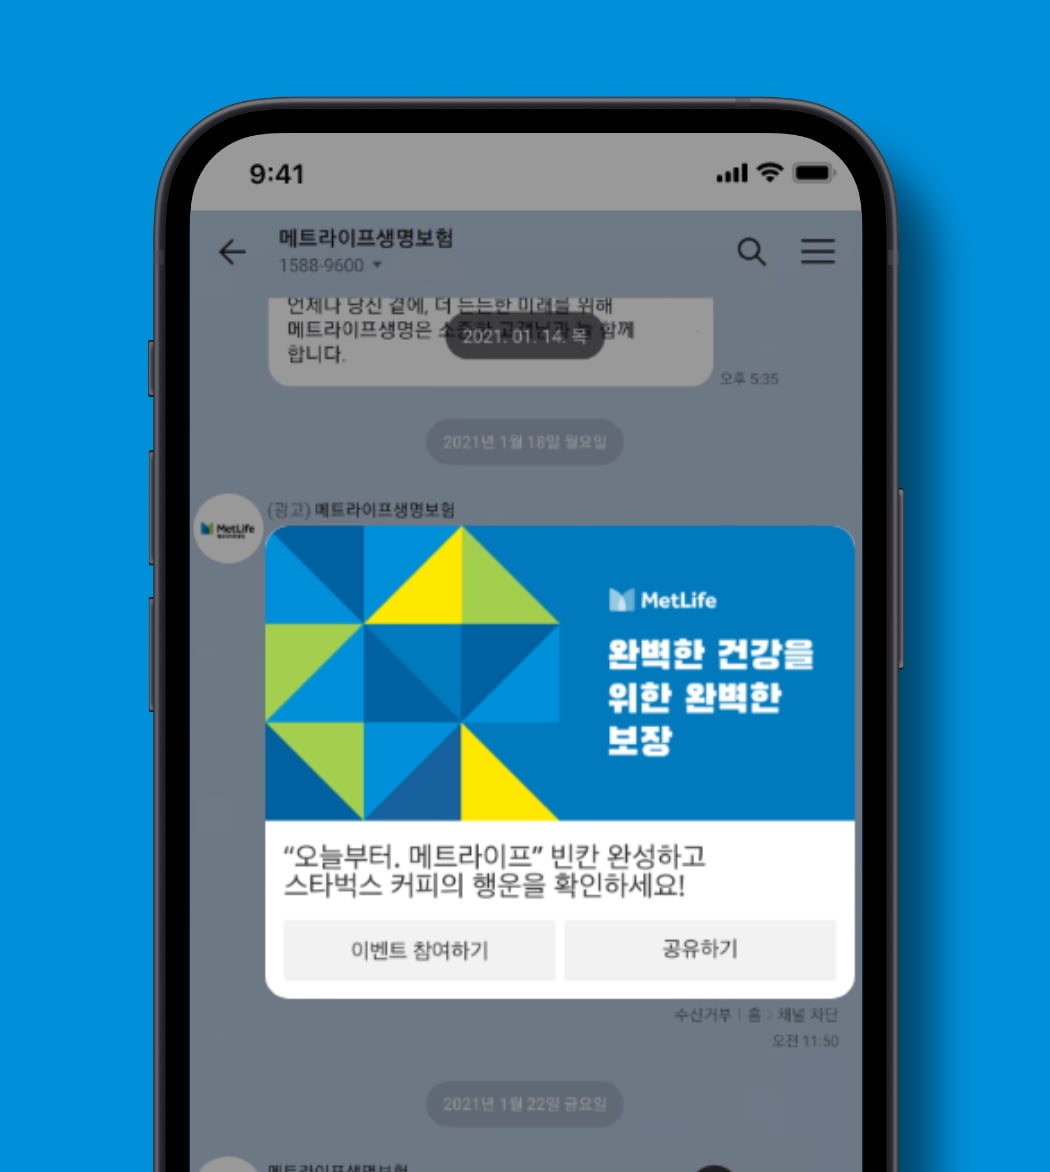 Phone screen showing branded communication with type and graphic on Kakao.